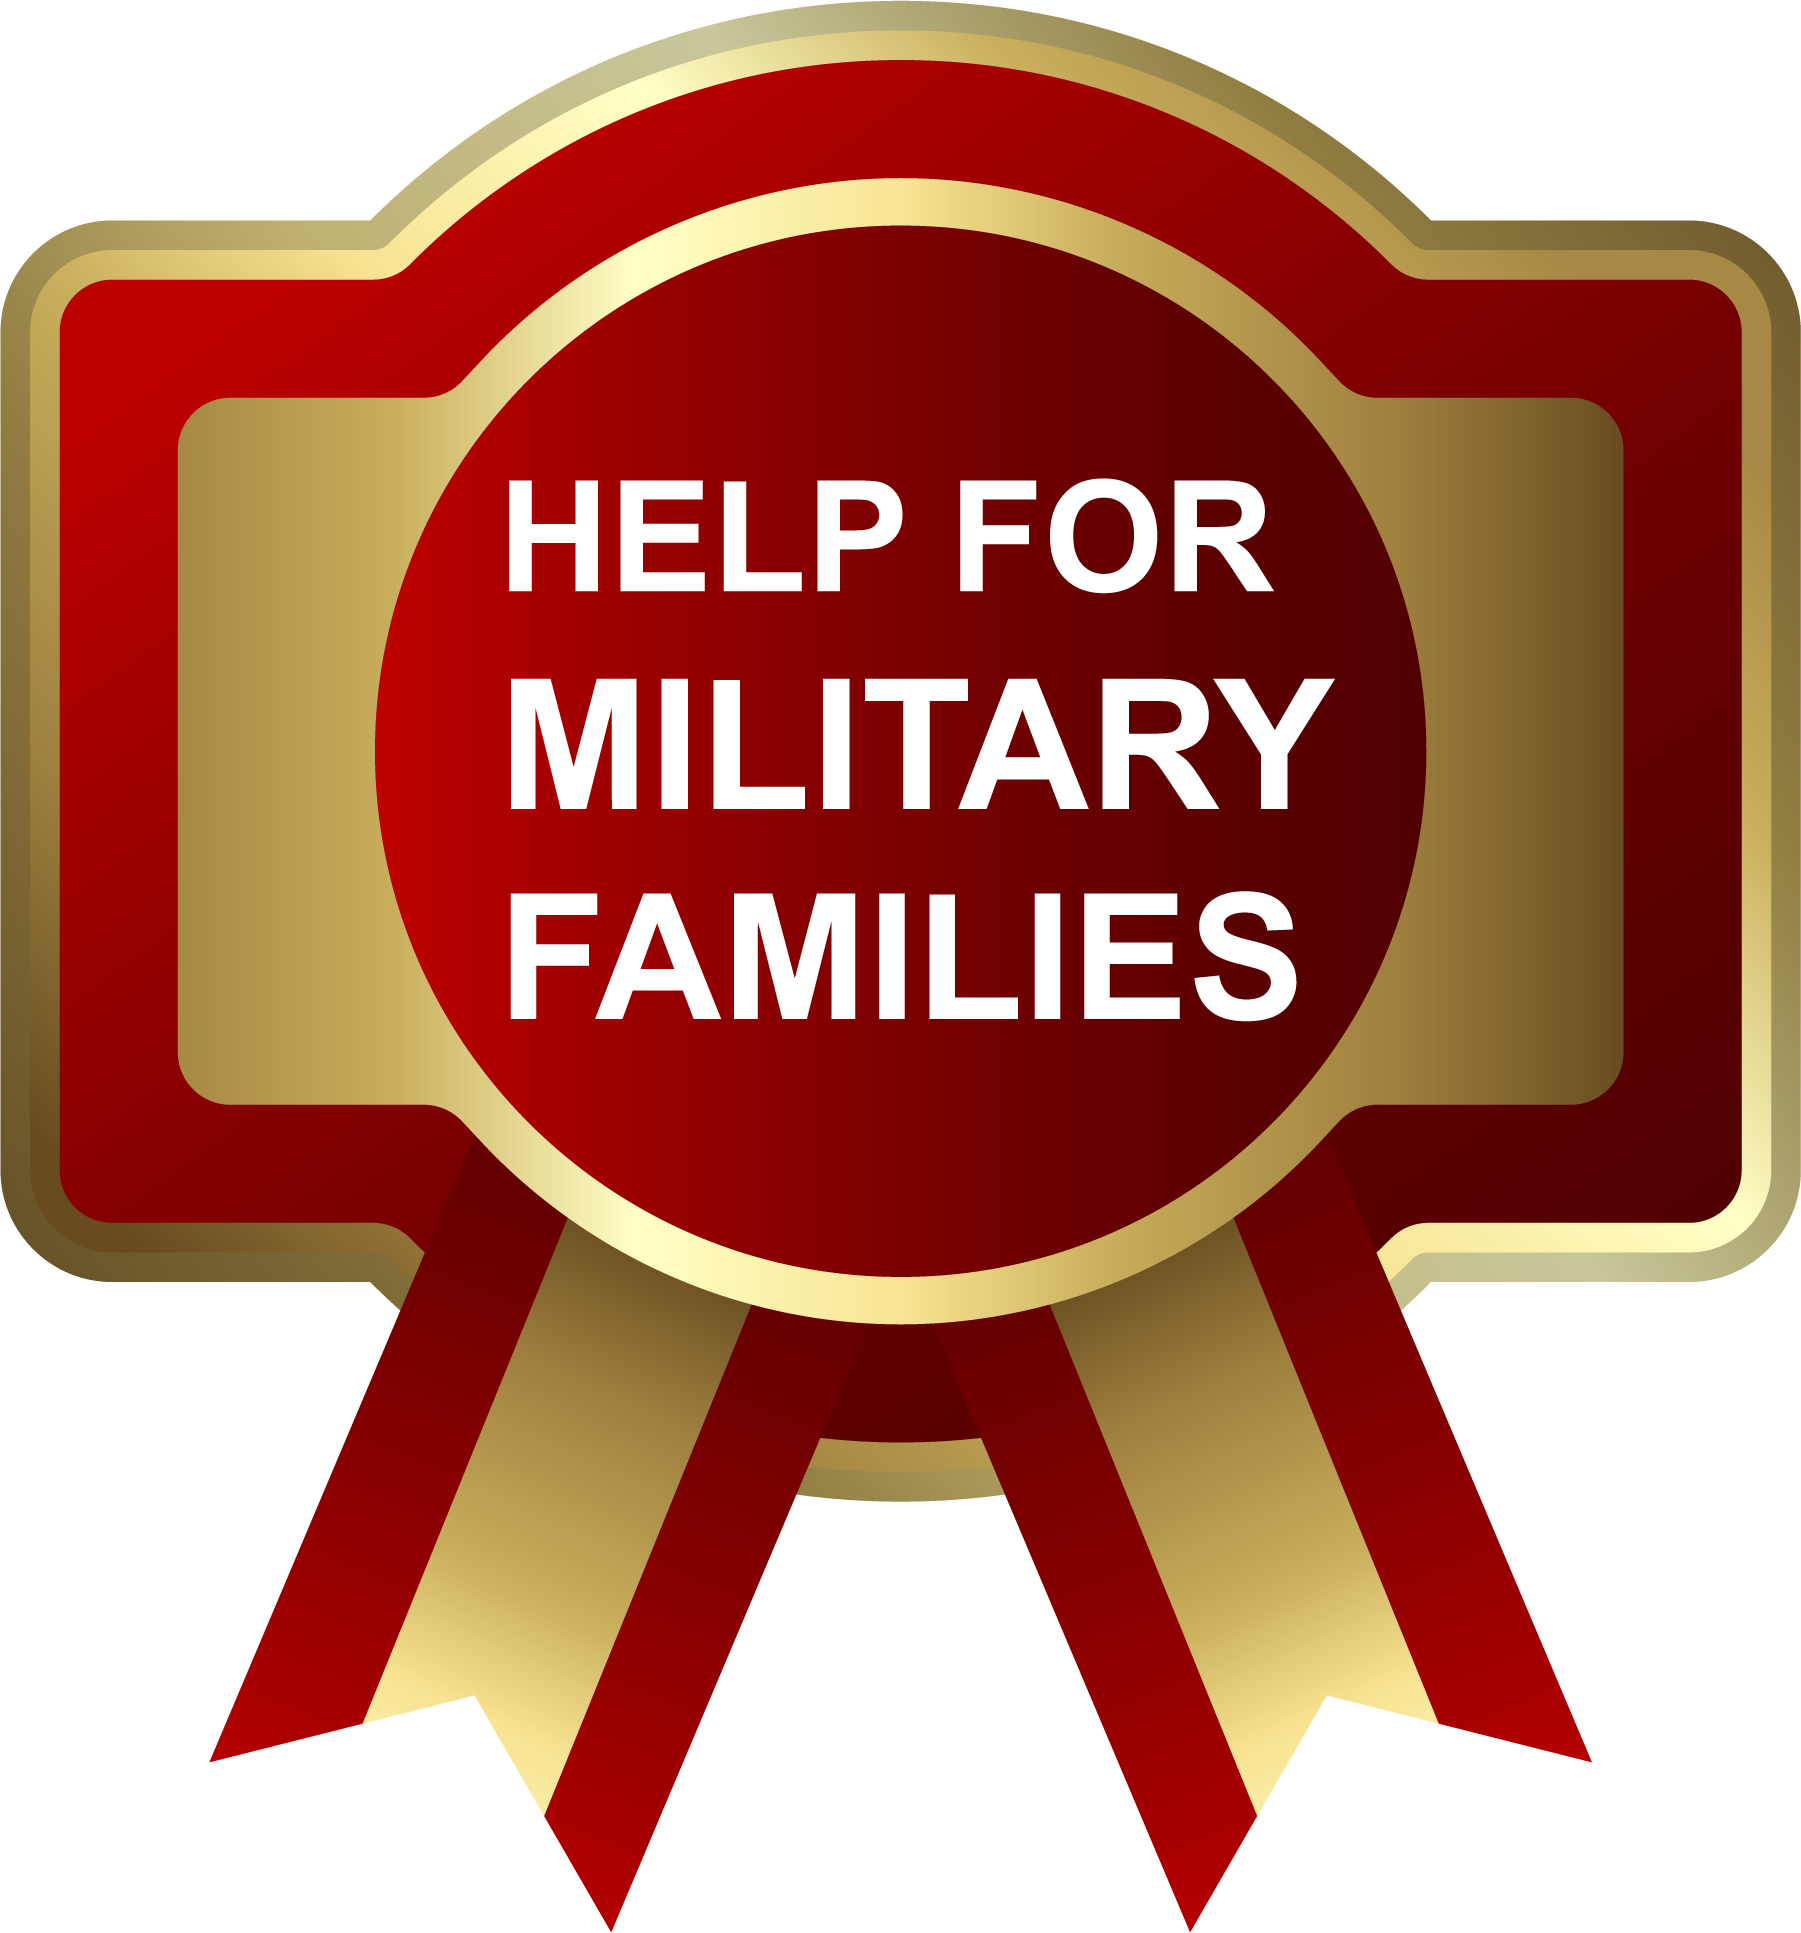 Find help for military families